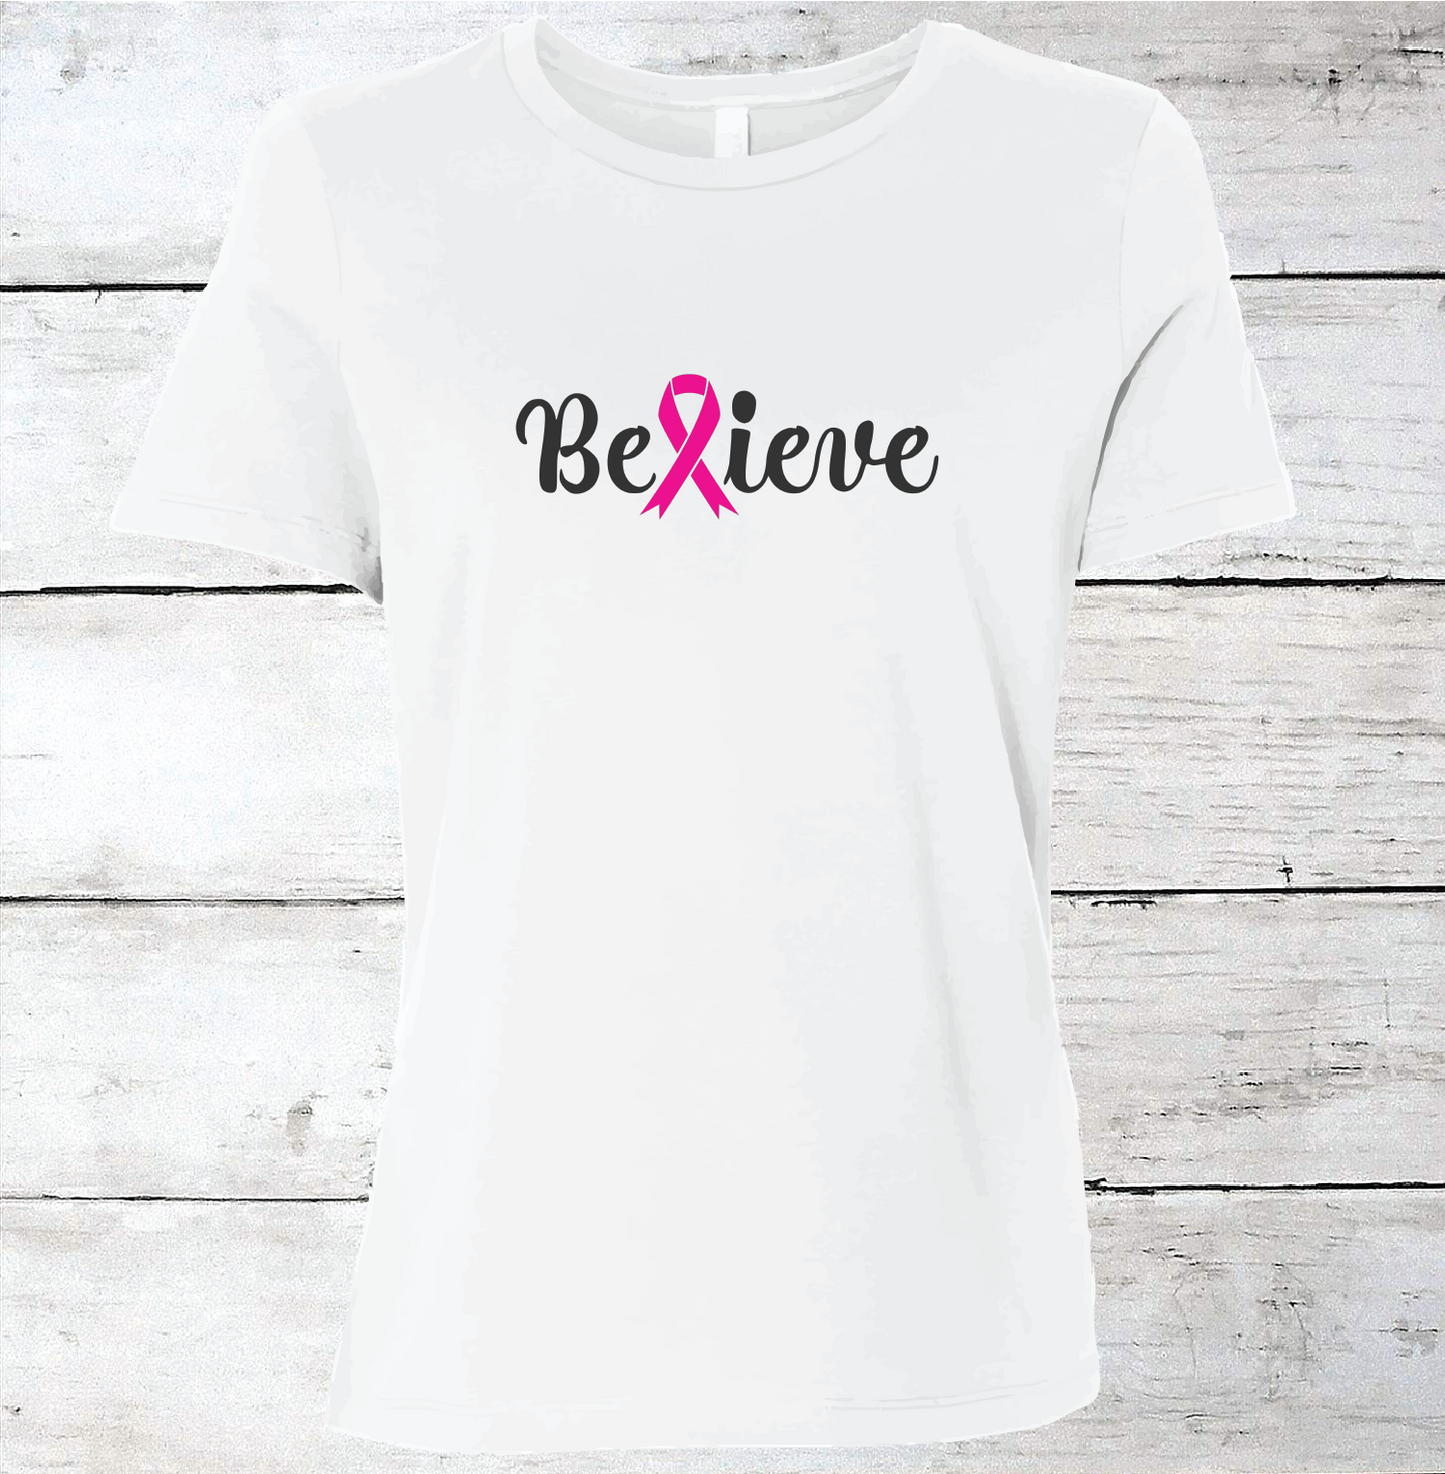 Breast Cancer Support - Believe T-Shirt